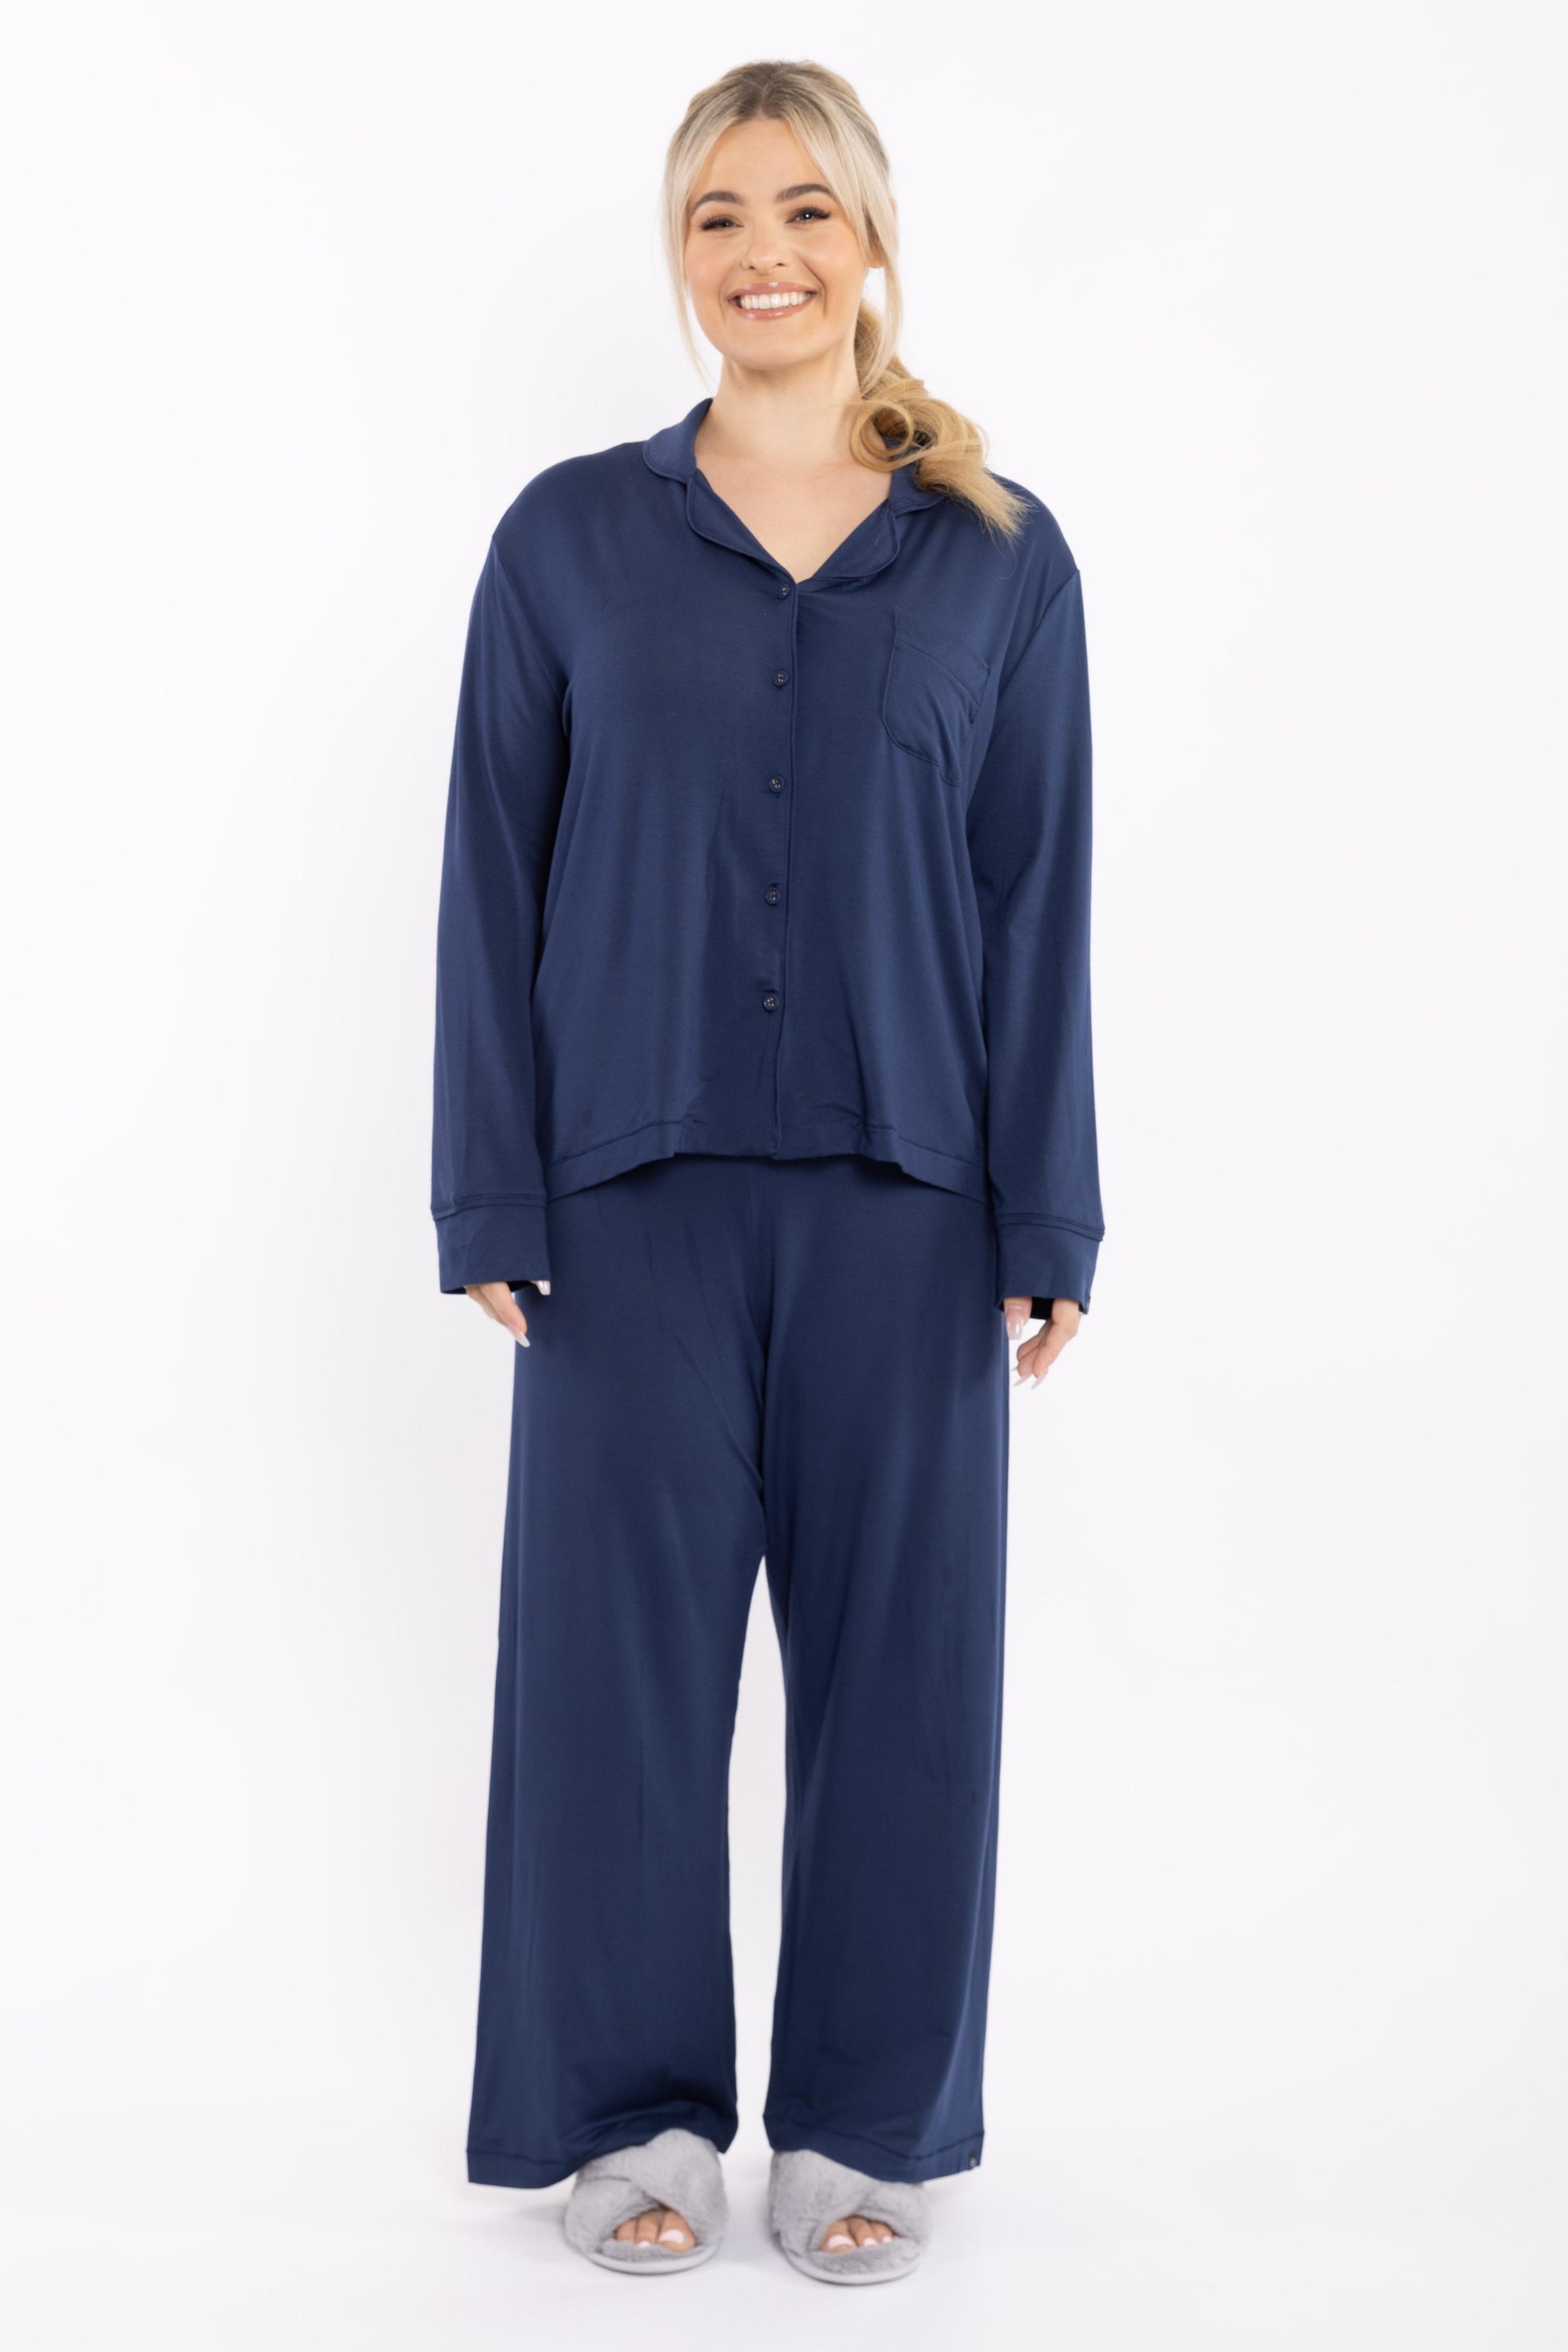 Wanting a good nights sleep? Relax in style and slip into our PJ pants made from a lightweight, cooling Jersey fabric. Pair with the PJ top for the perfect set.